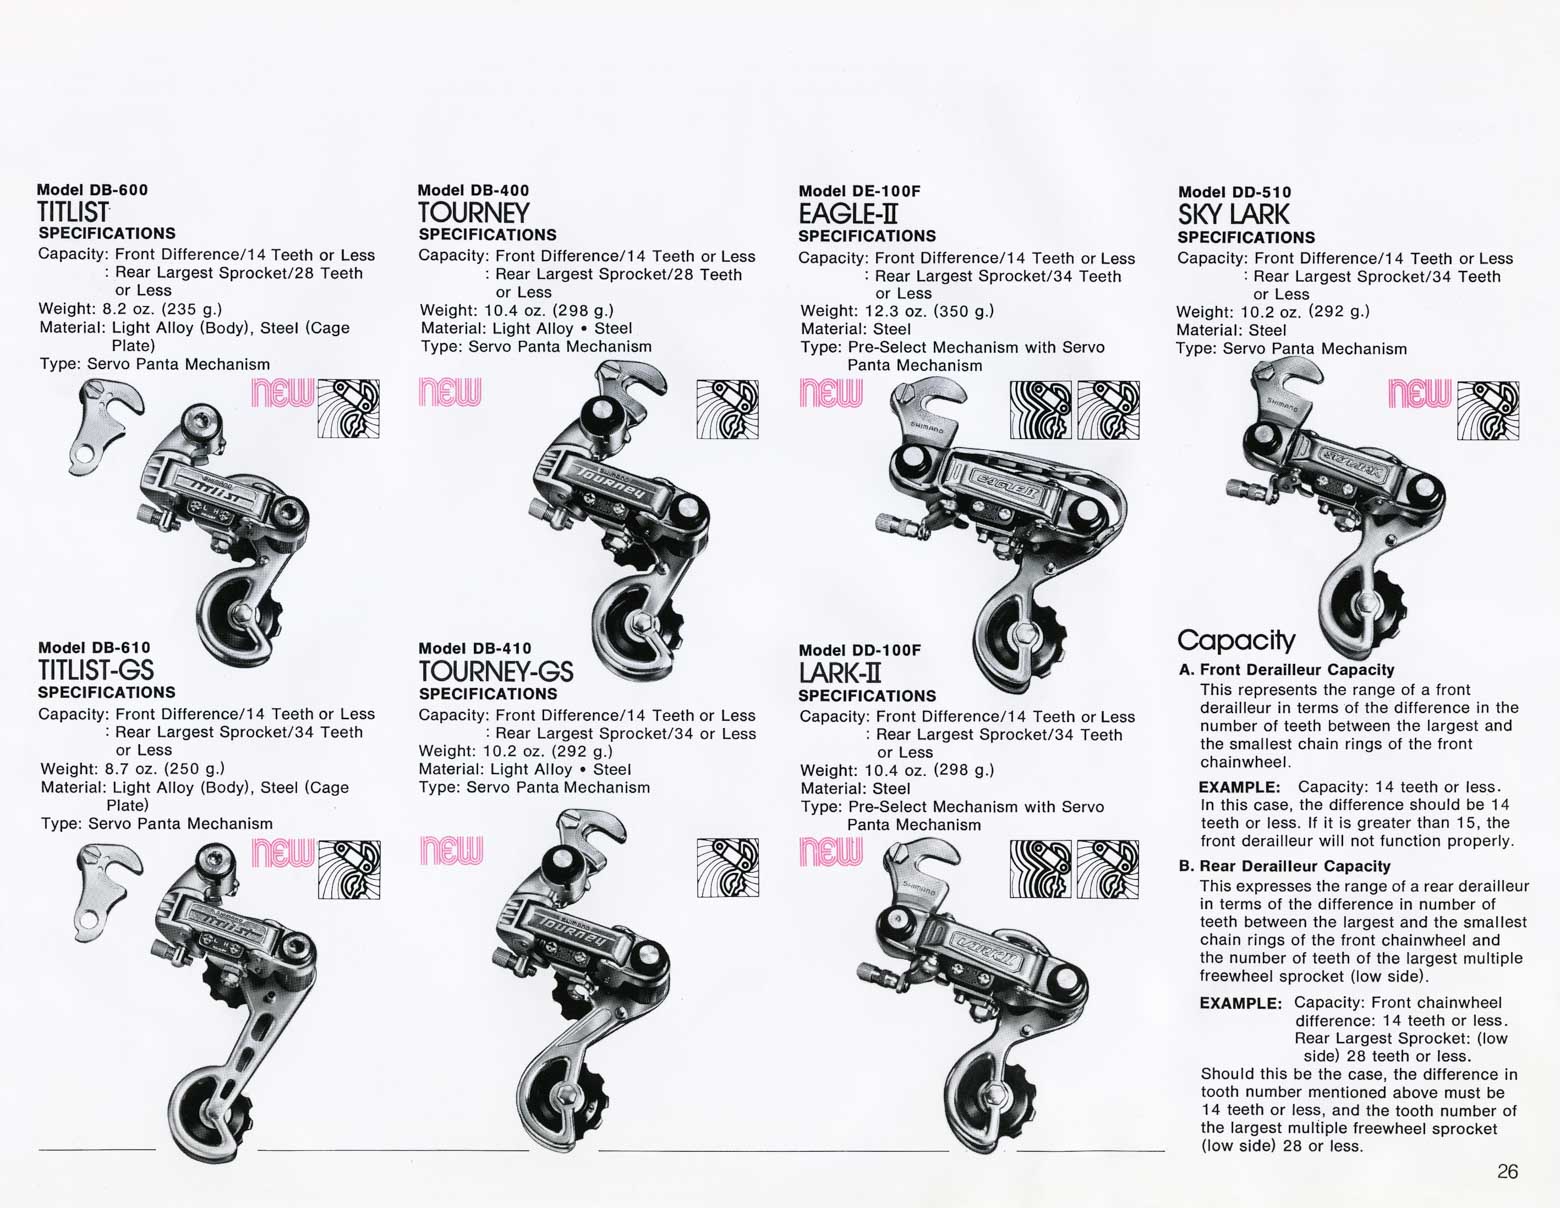 Shimano Bicycle System Components (1977) page 26 main image